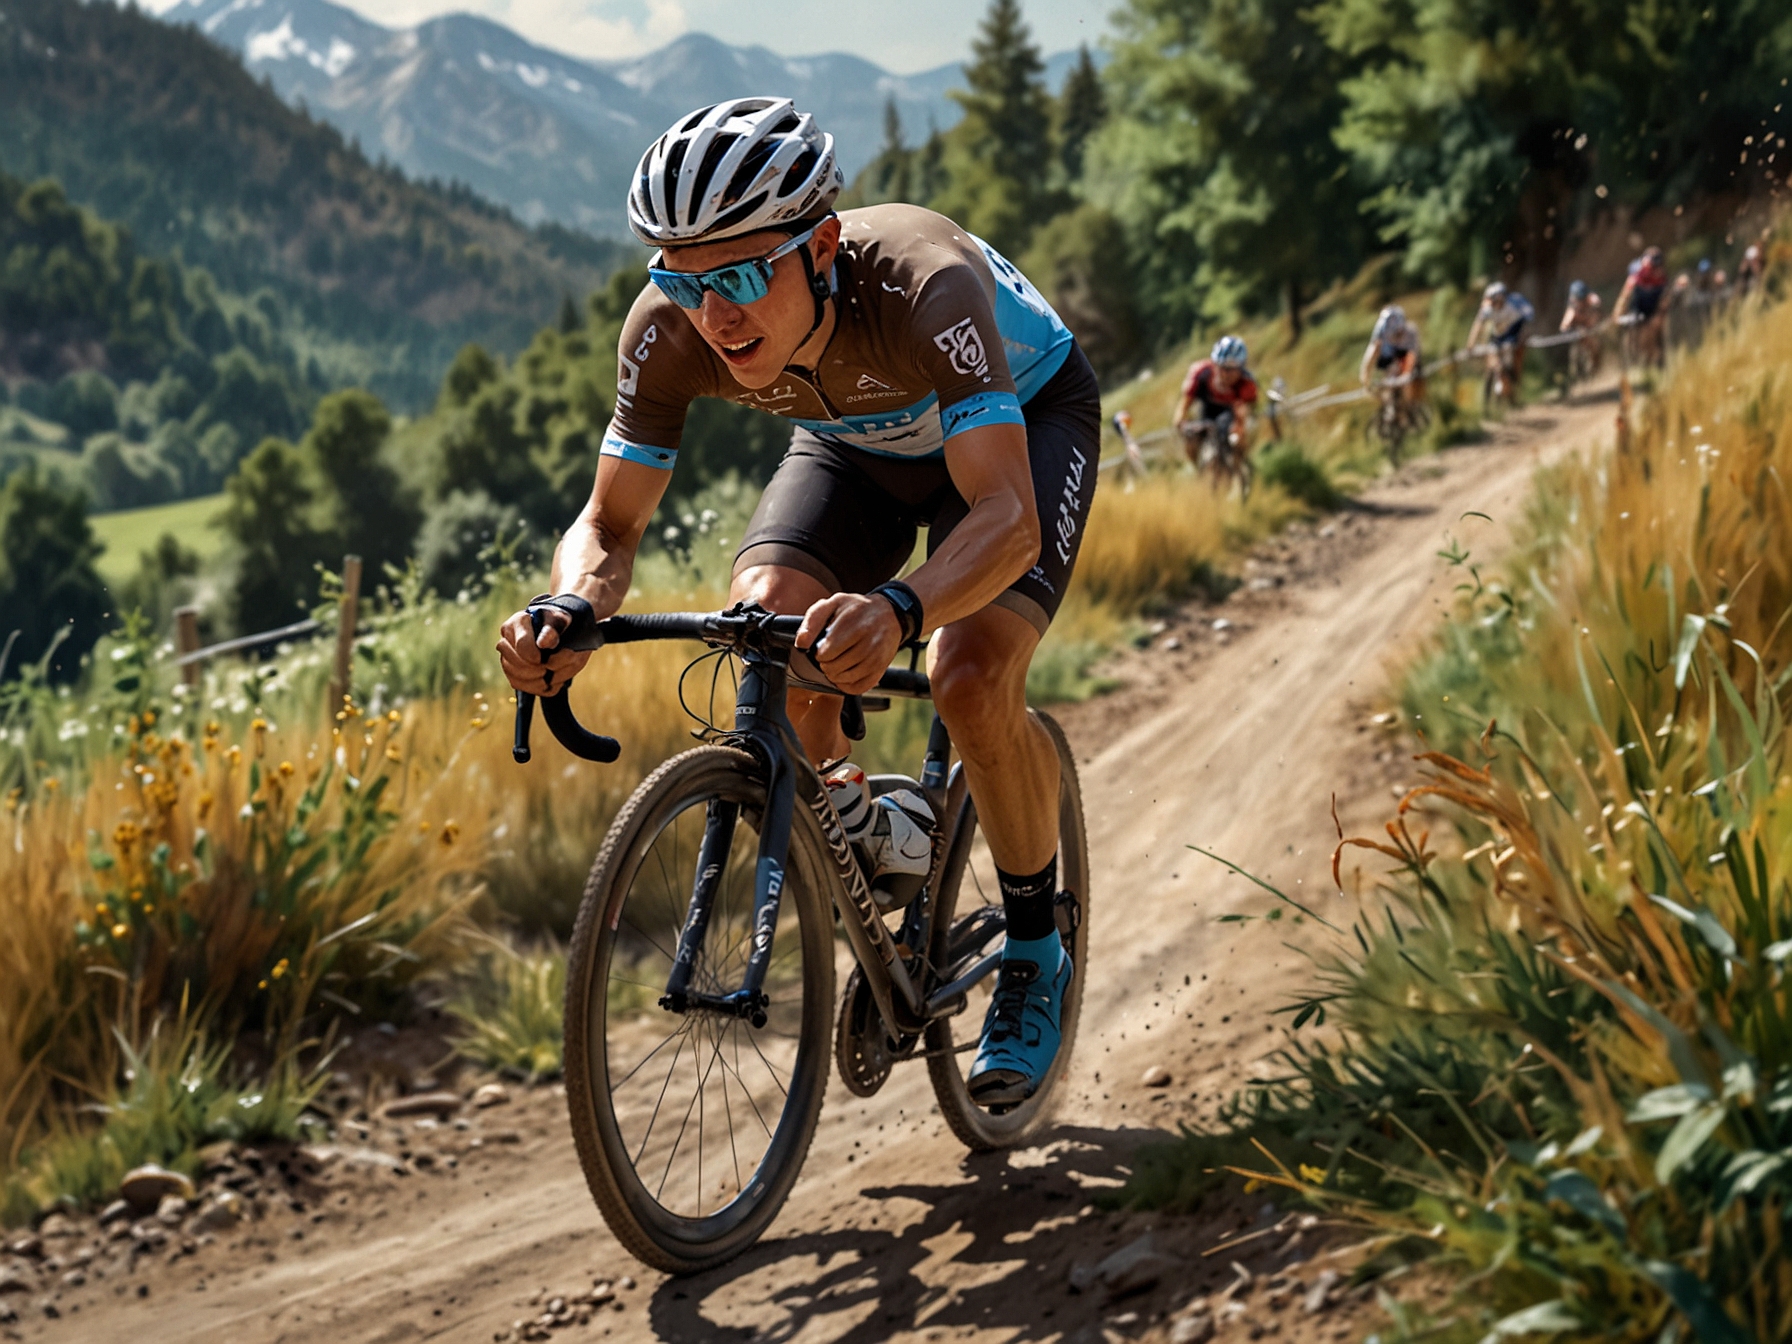 Bardet pushes through a mixed terrain during a gravel race, highlighting the endurance, strategy, and technical skills required for this burgeoning cycling discipline.